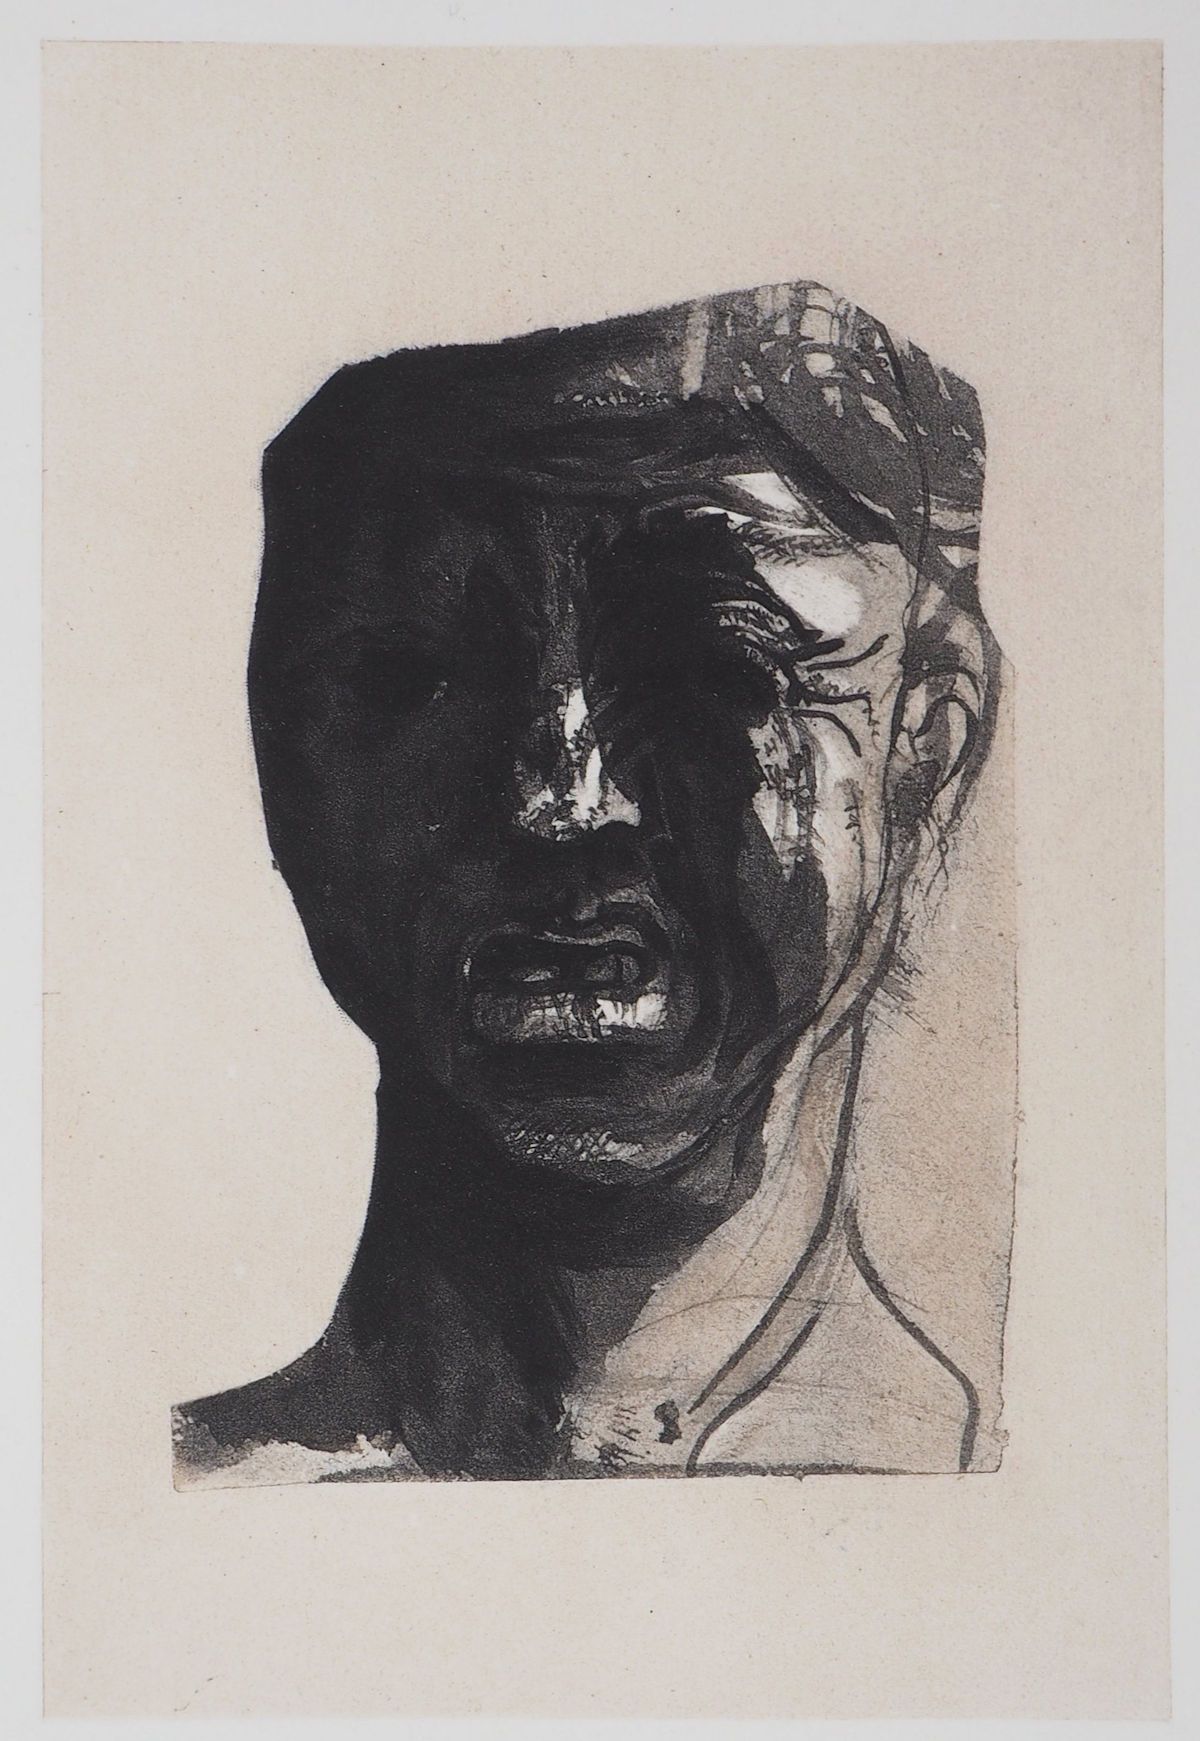 Auguste RODIN Auguste RODIN (1840-1917) (after)

Minos mask

Engraving (heliogra&hellip;